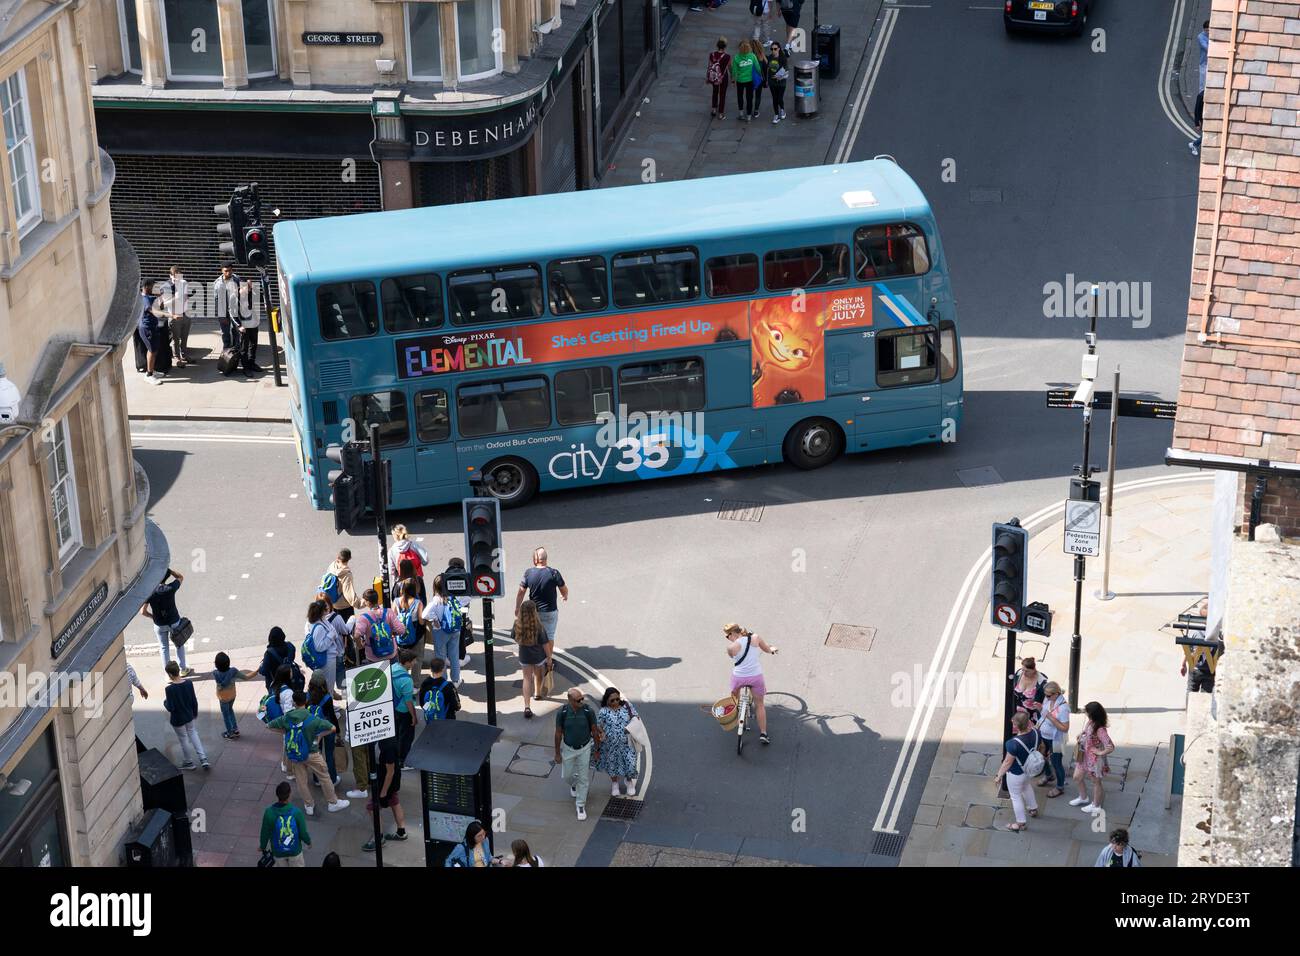 A double decker City 35 Ox bus driving through the centre of Oxford with a Disney Pixar Elemental film advertisement on the side. England Stock Photo